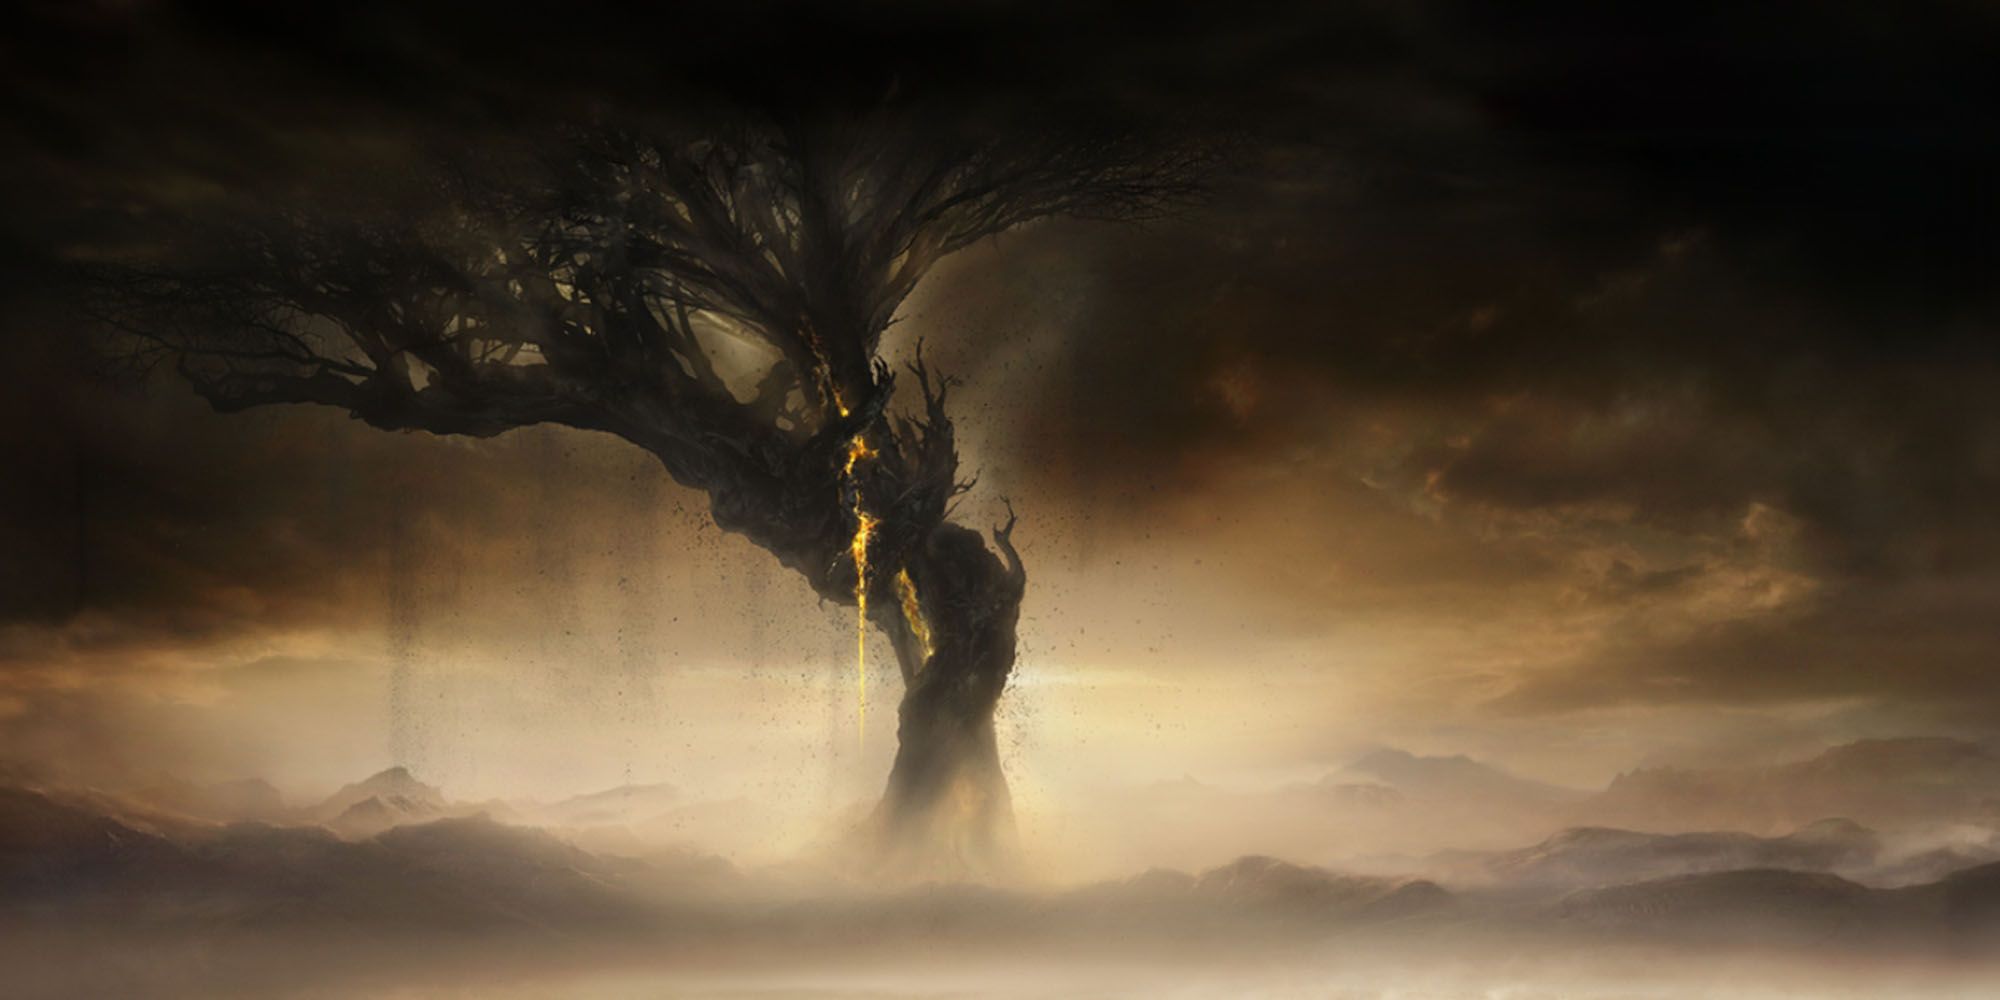 Elden Ring Shadow of the Erdtree promo art showing a giant tangled tree reaching into the clouds